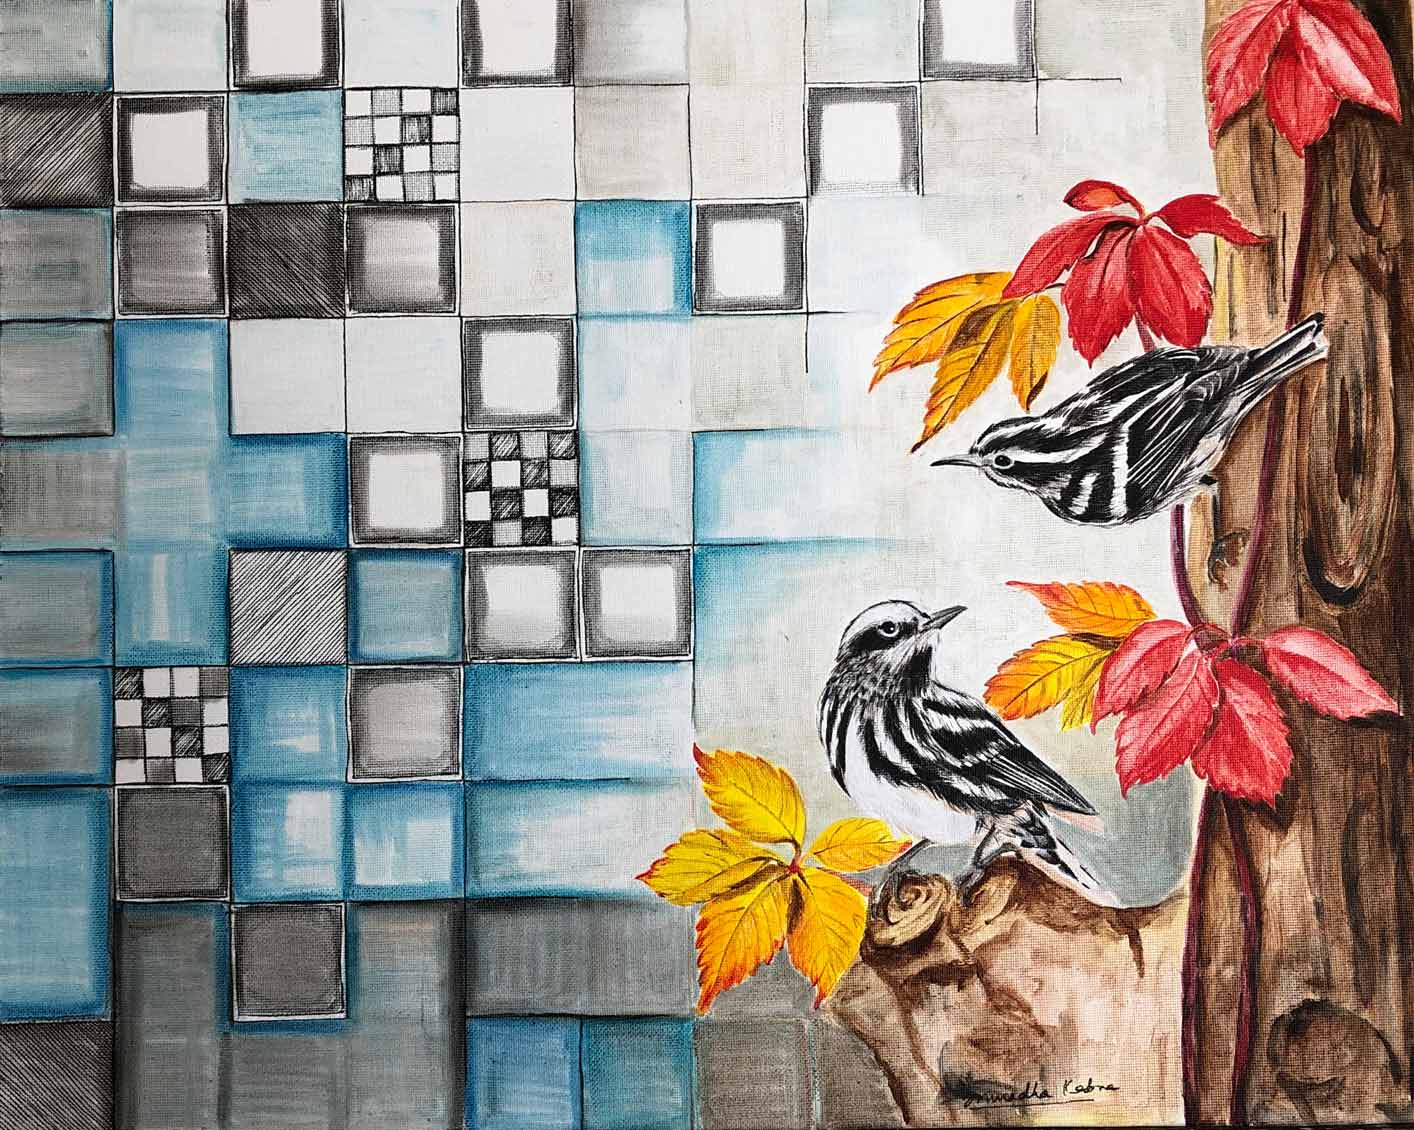 Buy painting online Singapore Block by Block The North American Black & White Warblers Anuradha Kabra India Exquisite Art